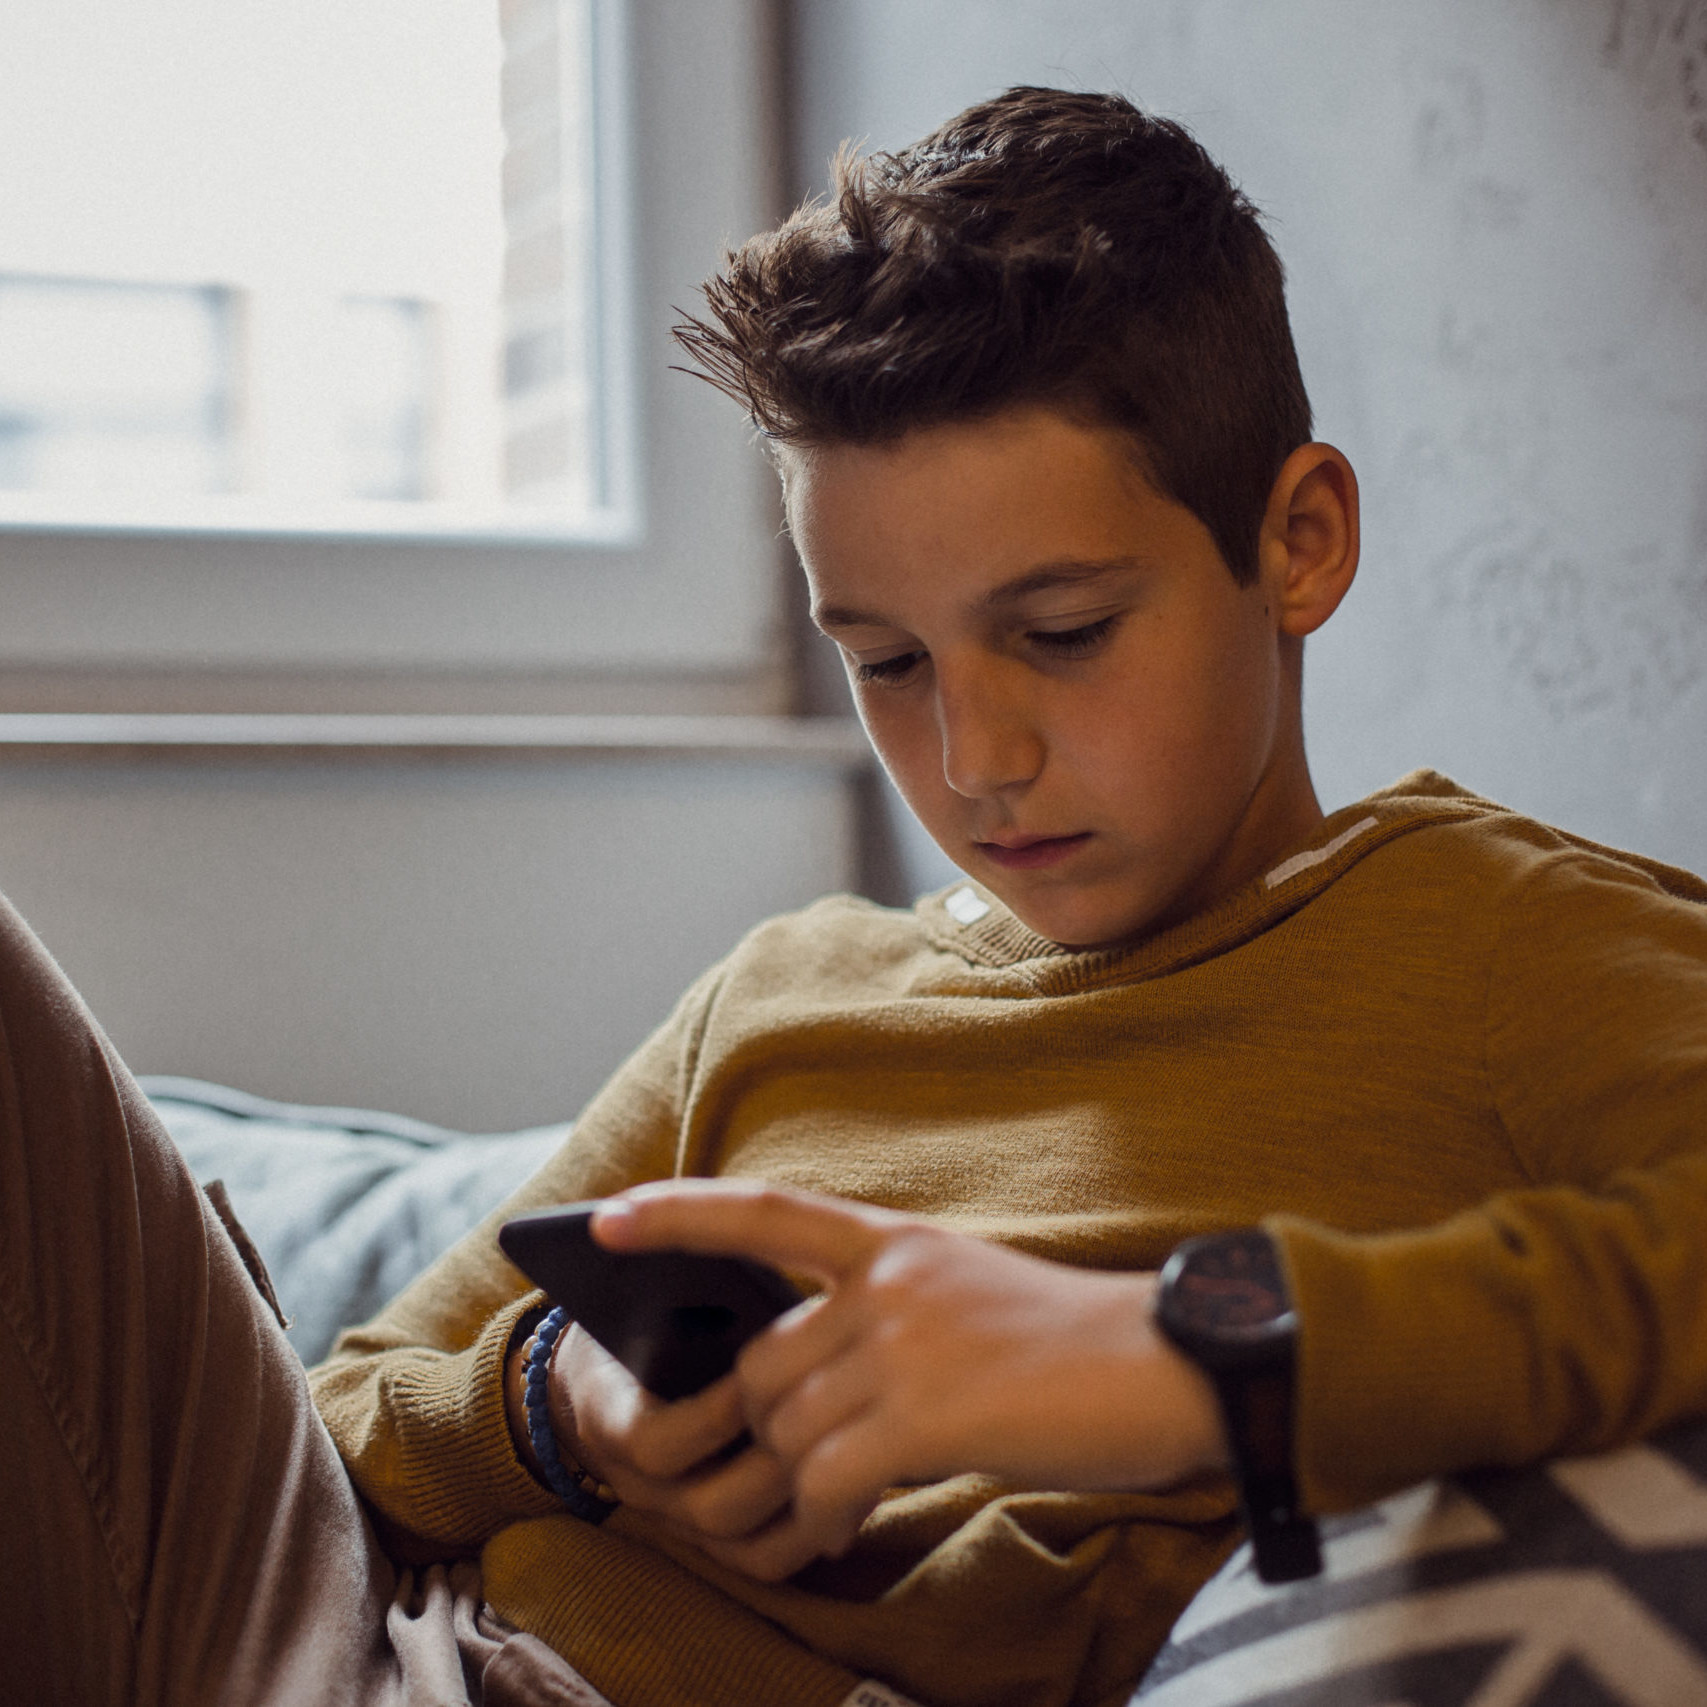 Young boy sitting on his bed and looking at his phone.